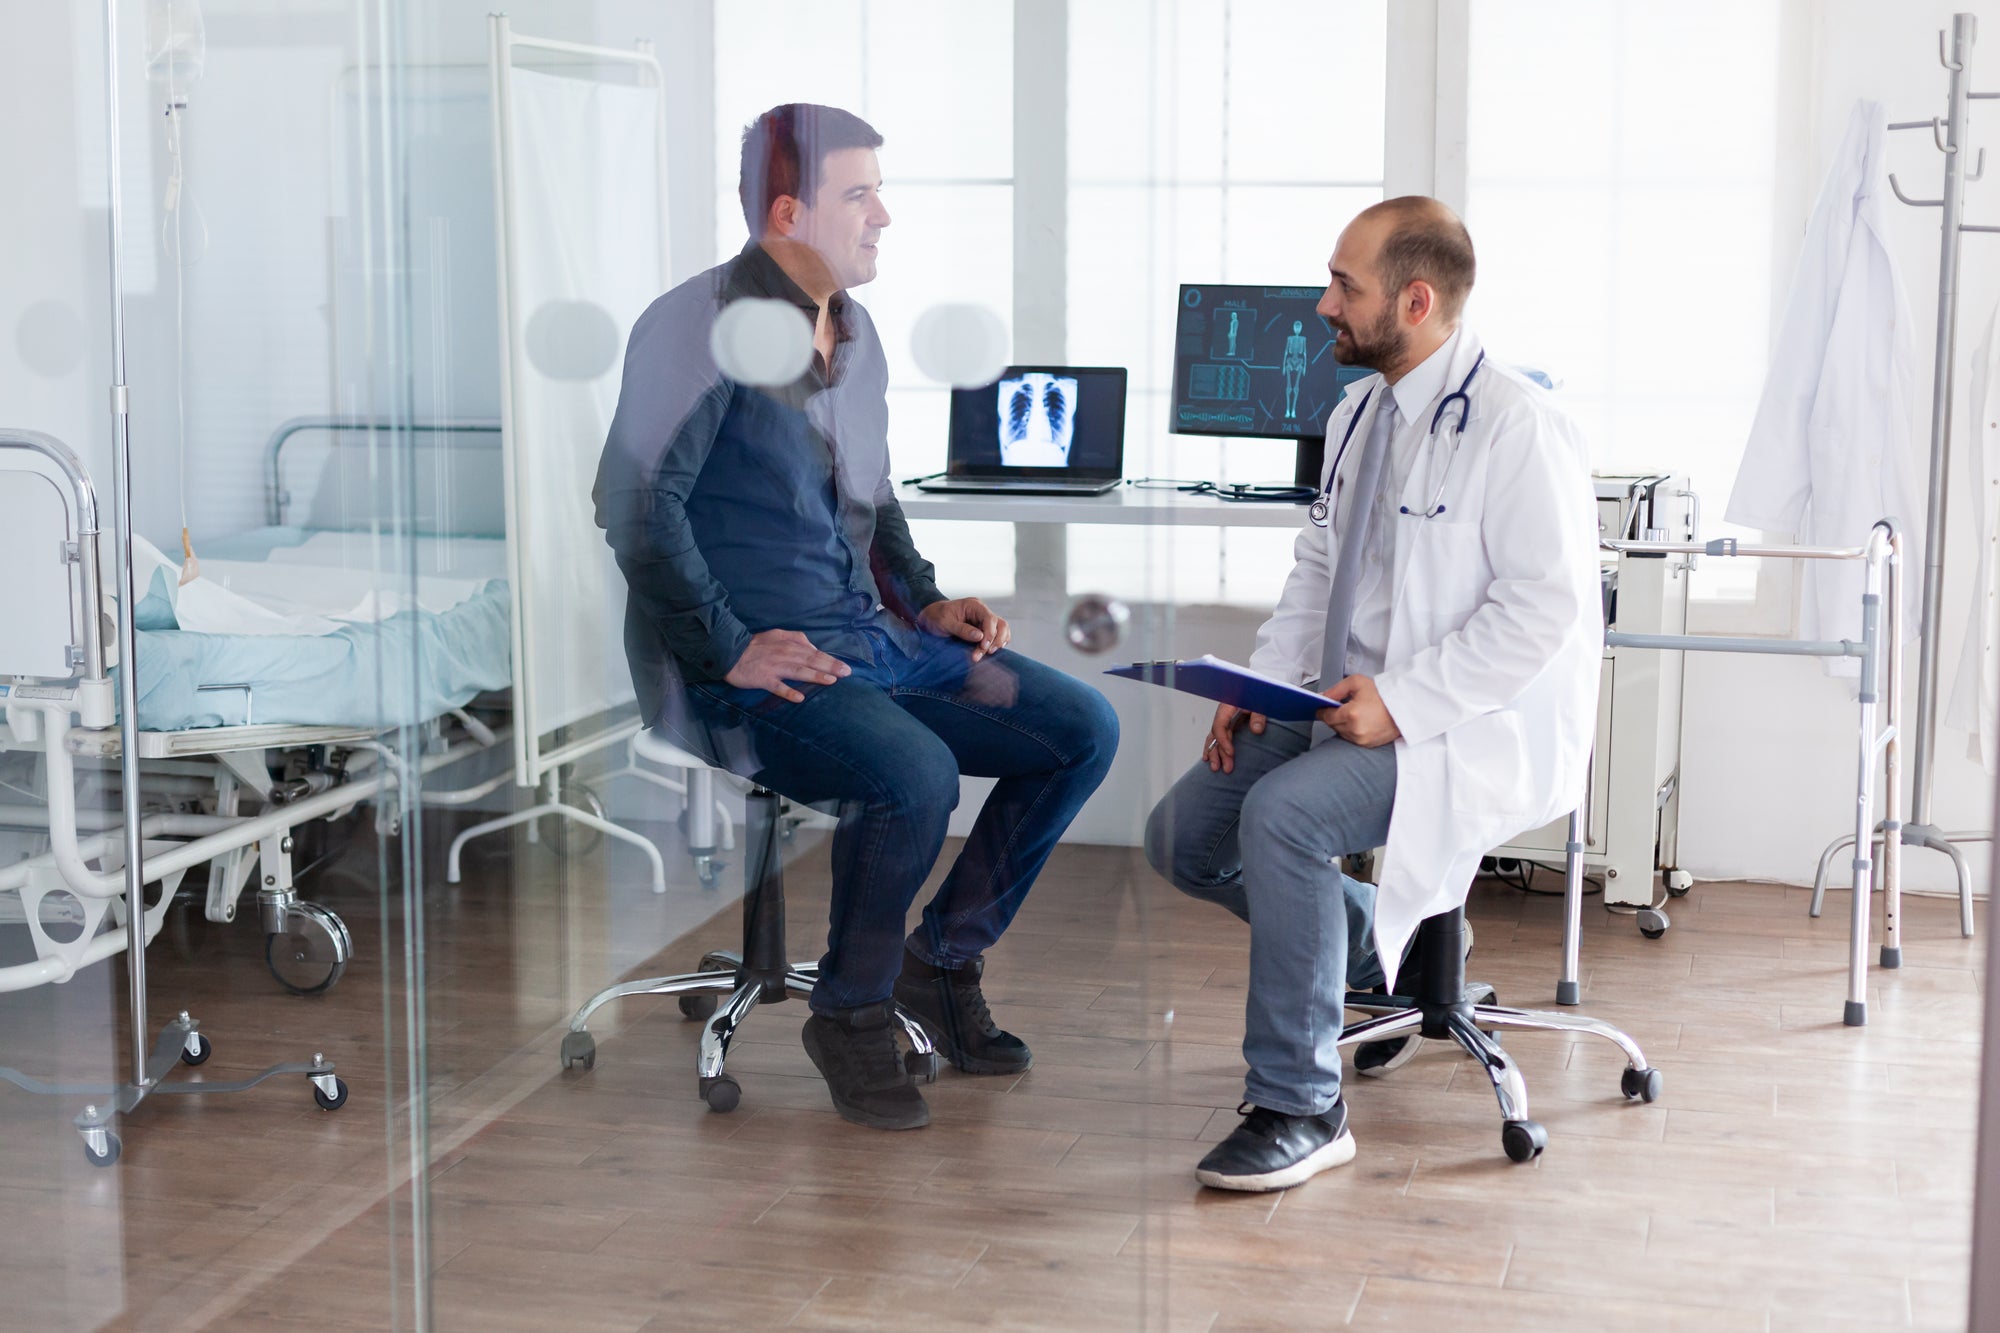 Prioritizing Occupational Health with Saddle Stools in Healthcare Practices